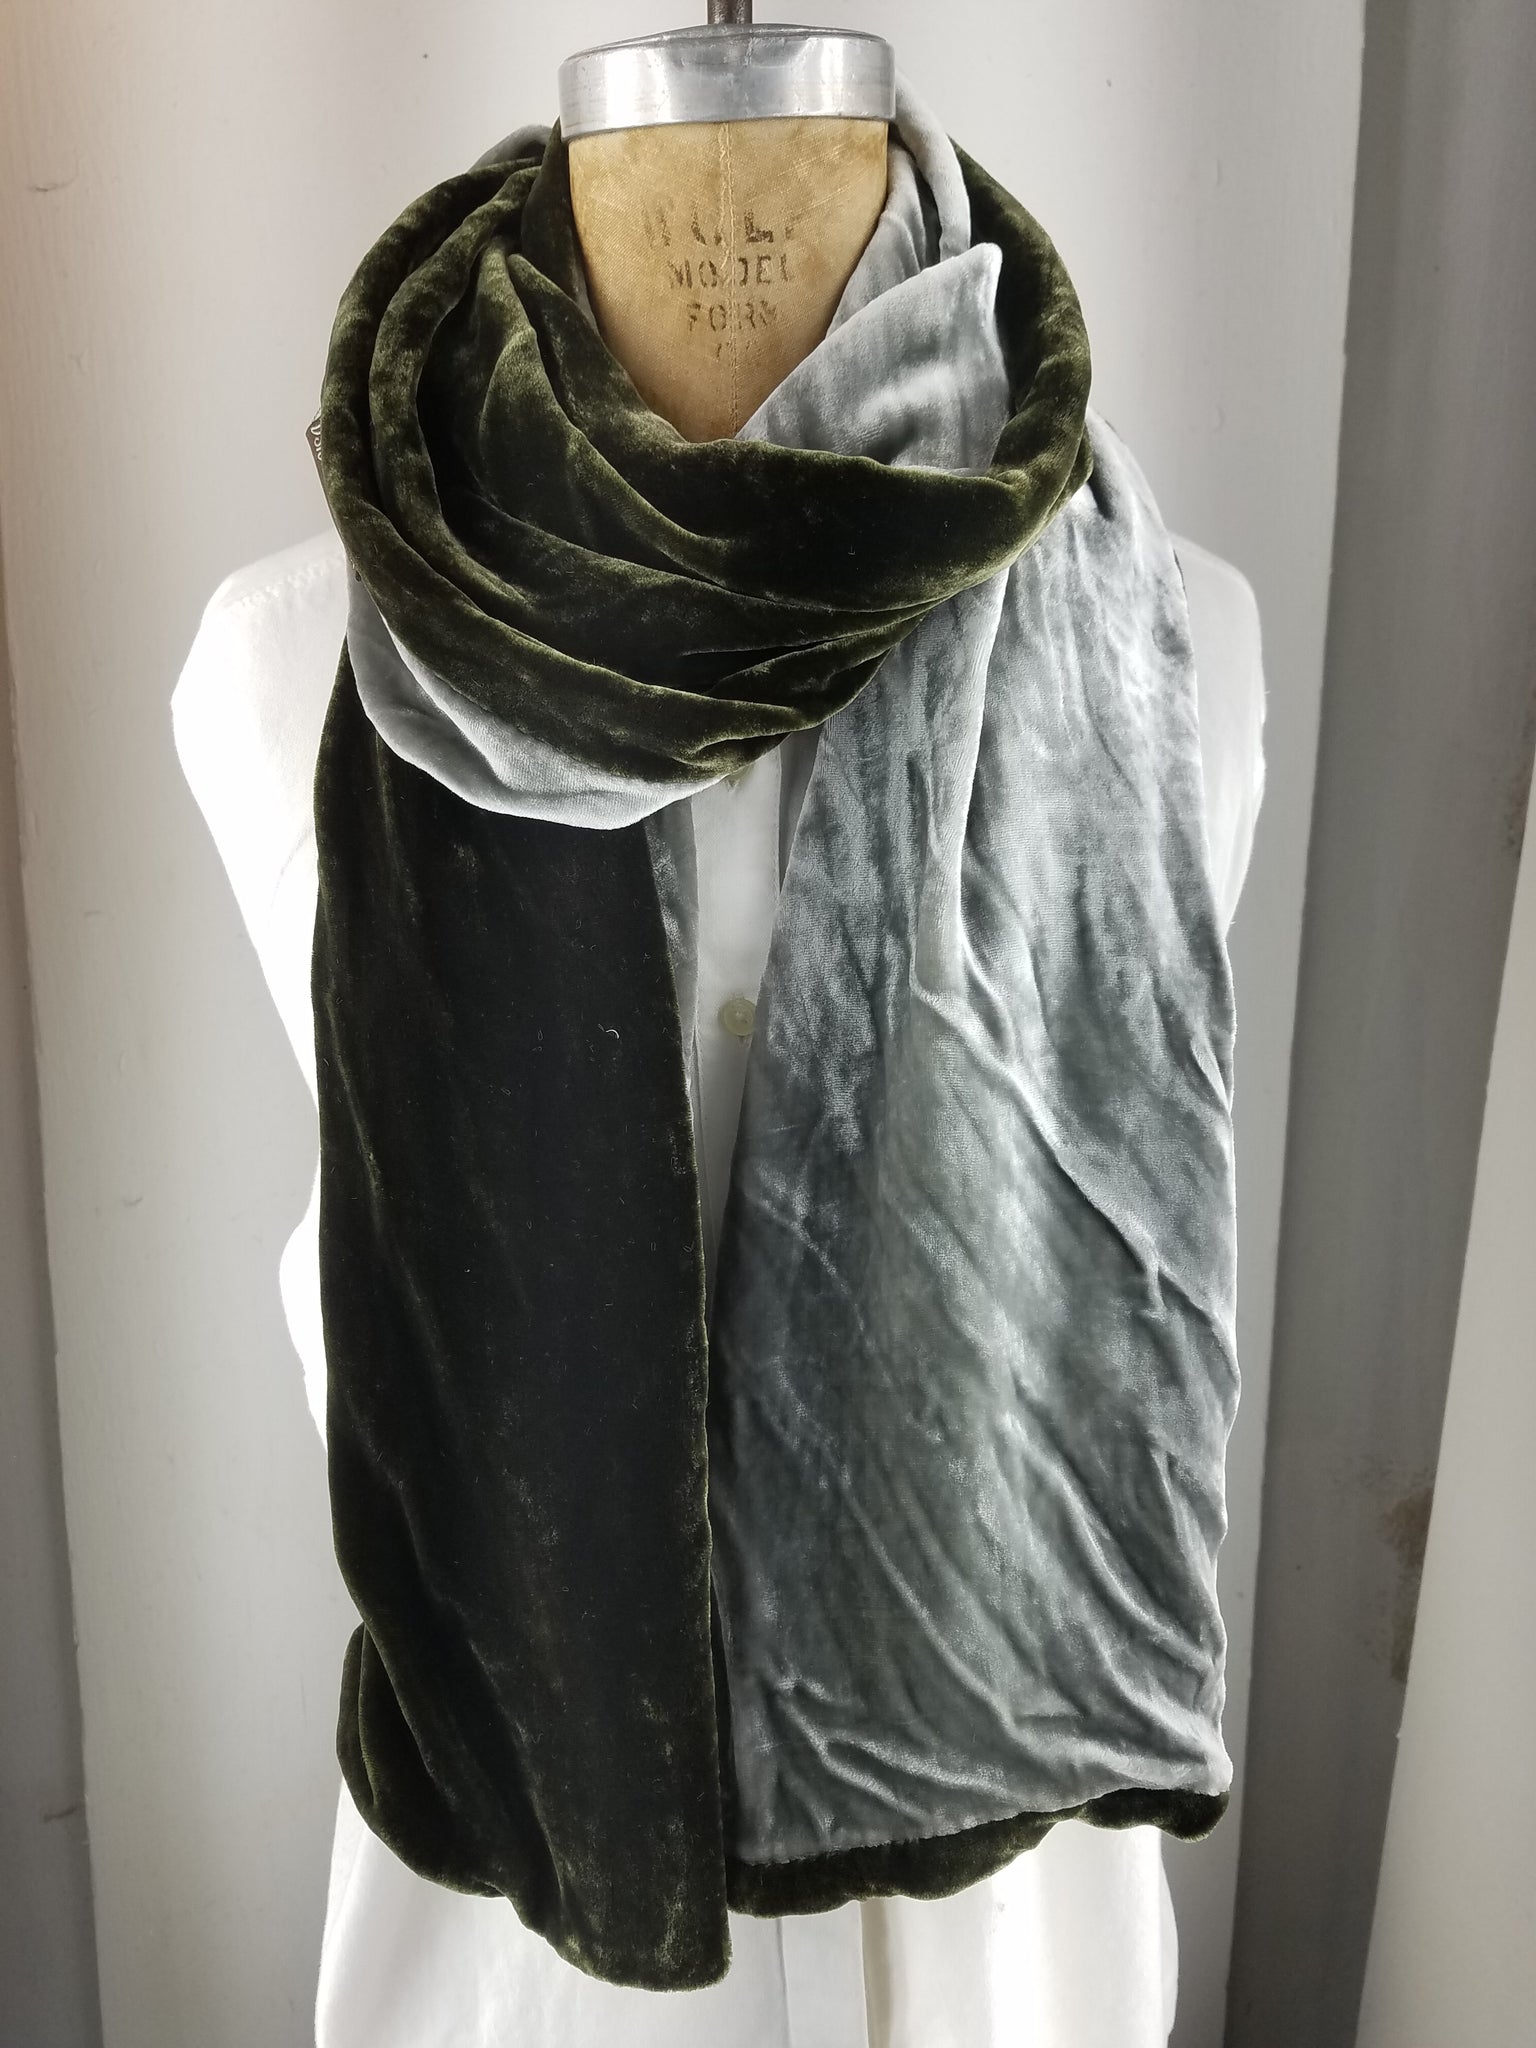 Olive and Silver two-tone silk velvet scarf